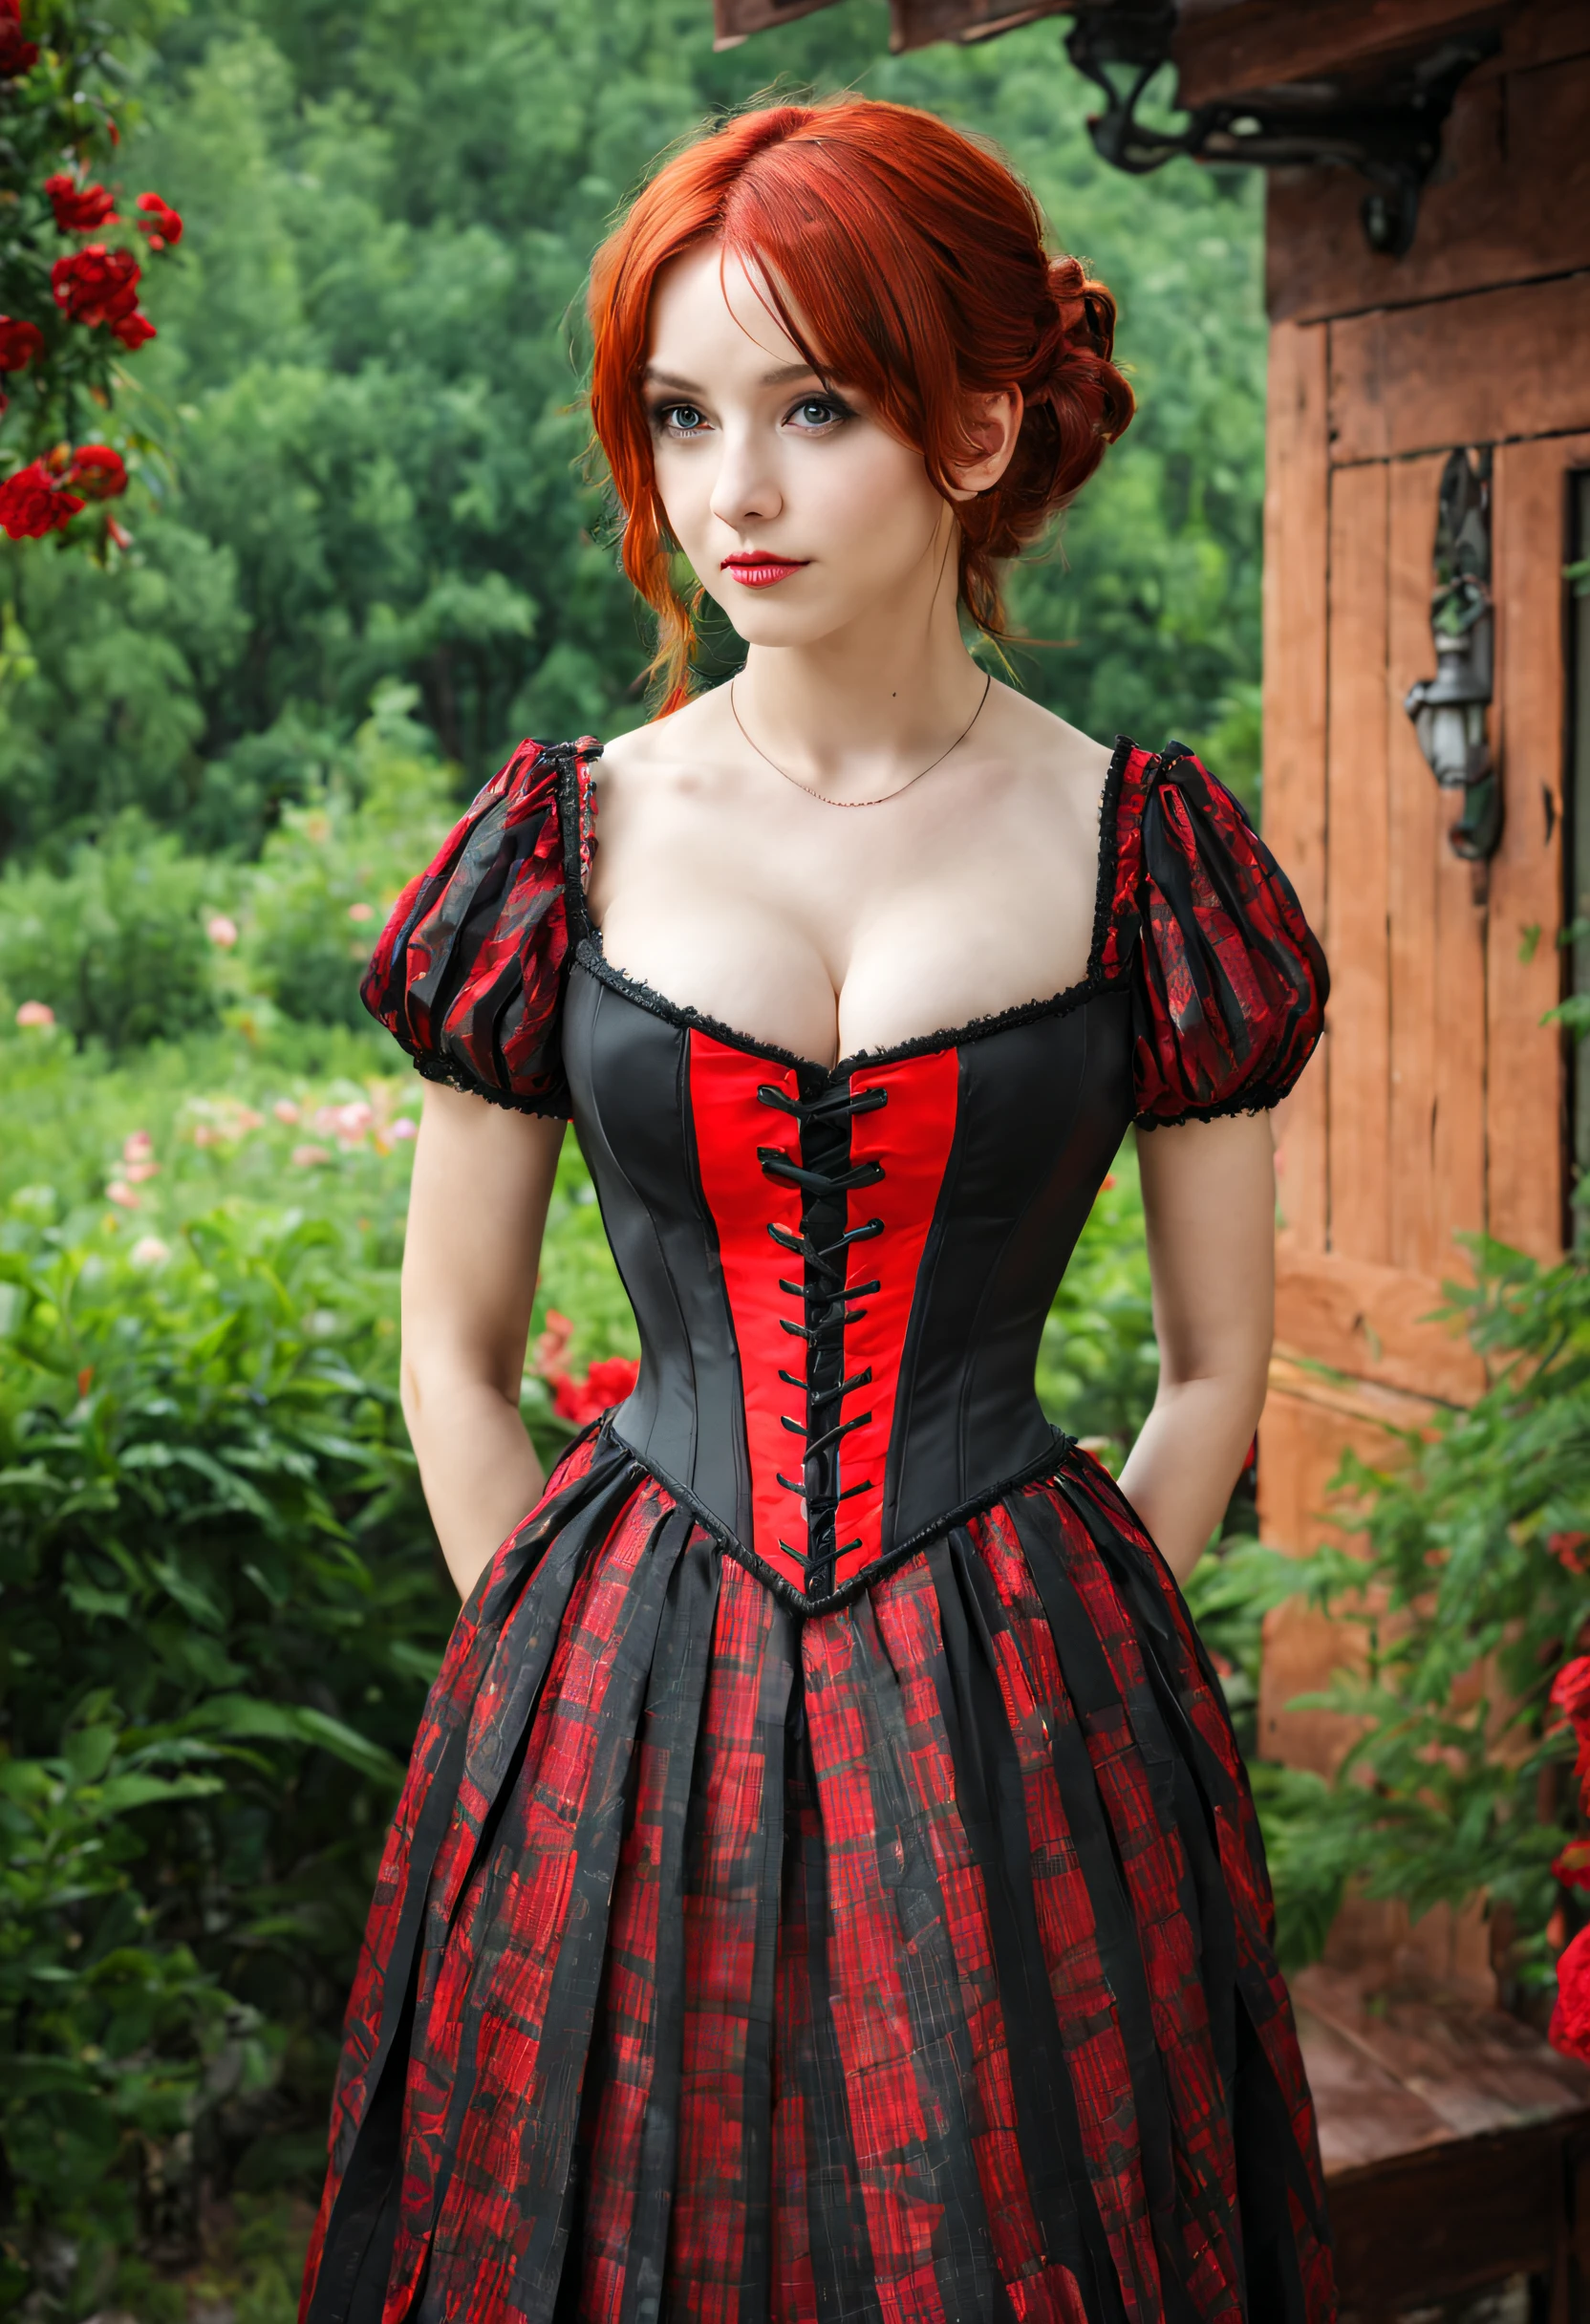 beautiful 20 year old, red hair, green eyes, enormous , black and red corset, background is a Victorian era bedroom overlooking a flower garden.